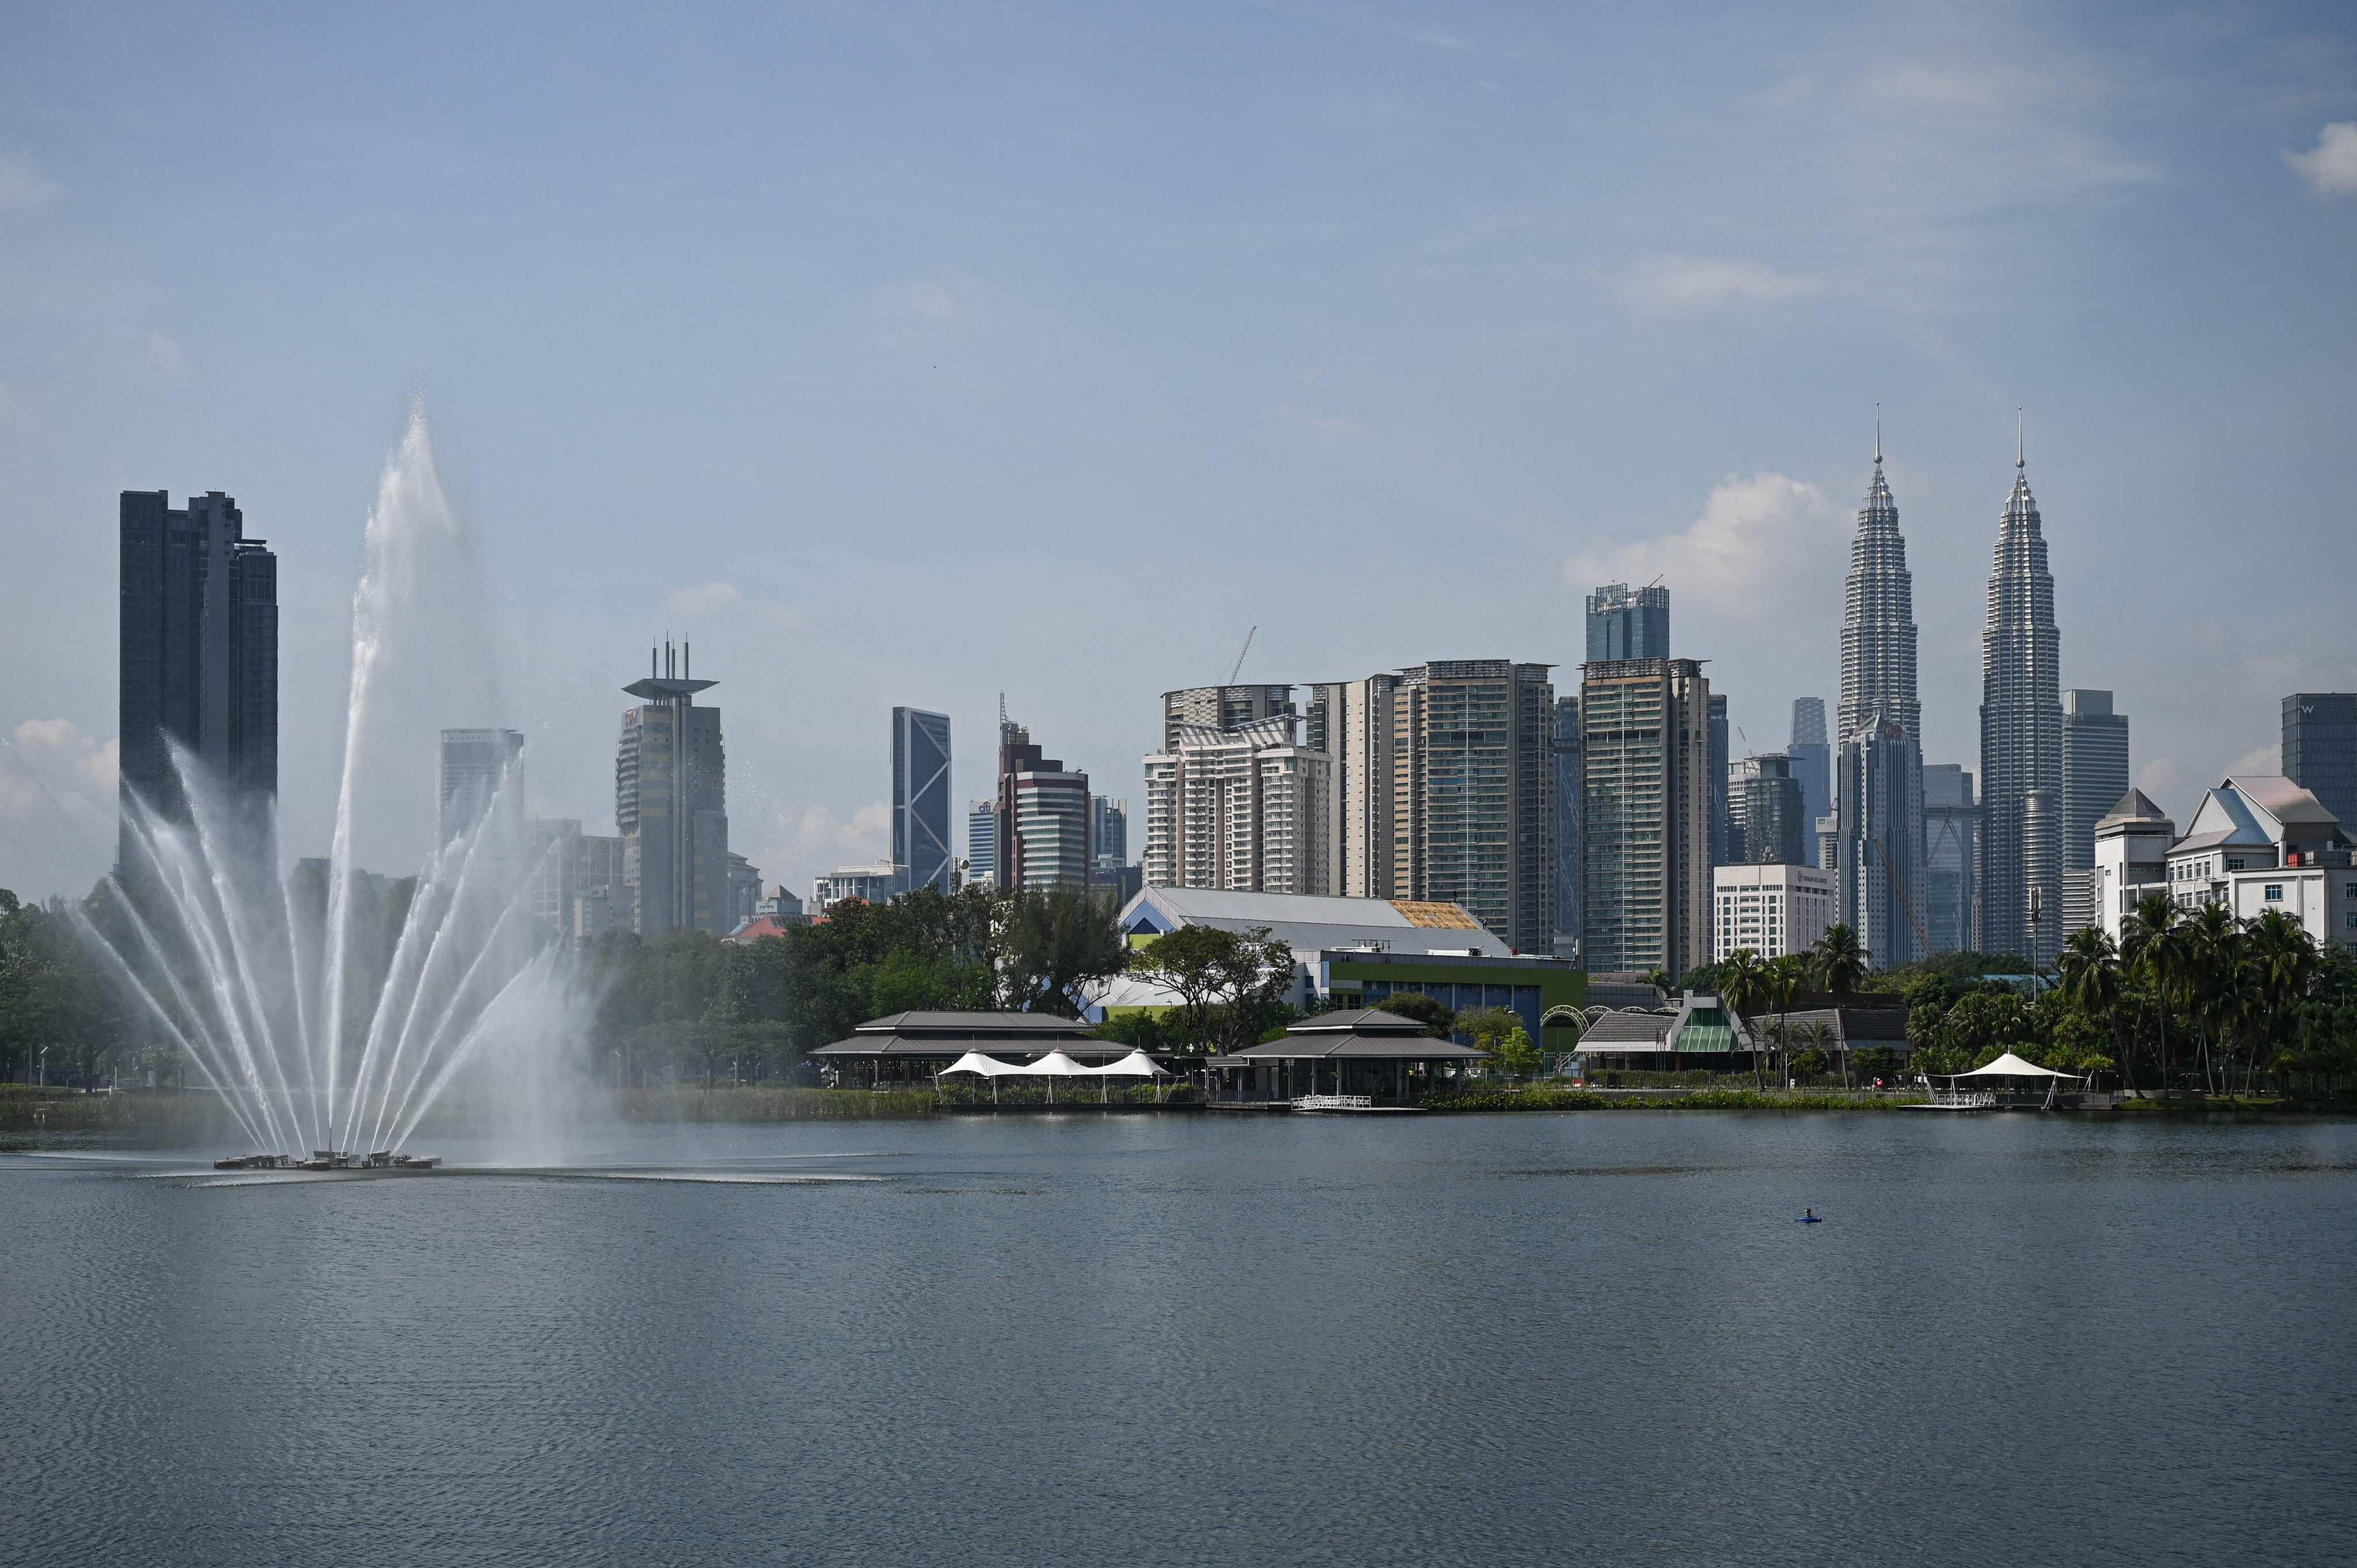 Malaysia’s landmark Petronas Twin Towers, right, and other commericail buildings in Kuala Lumpur, which is being visited by a Hong Kong delegation. Photo: AFP.